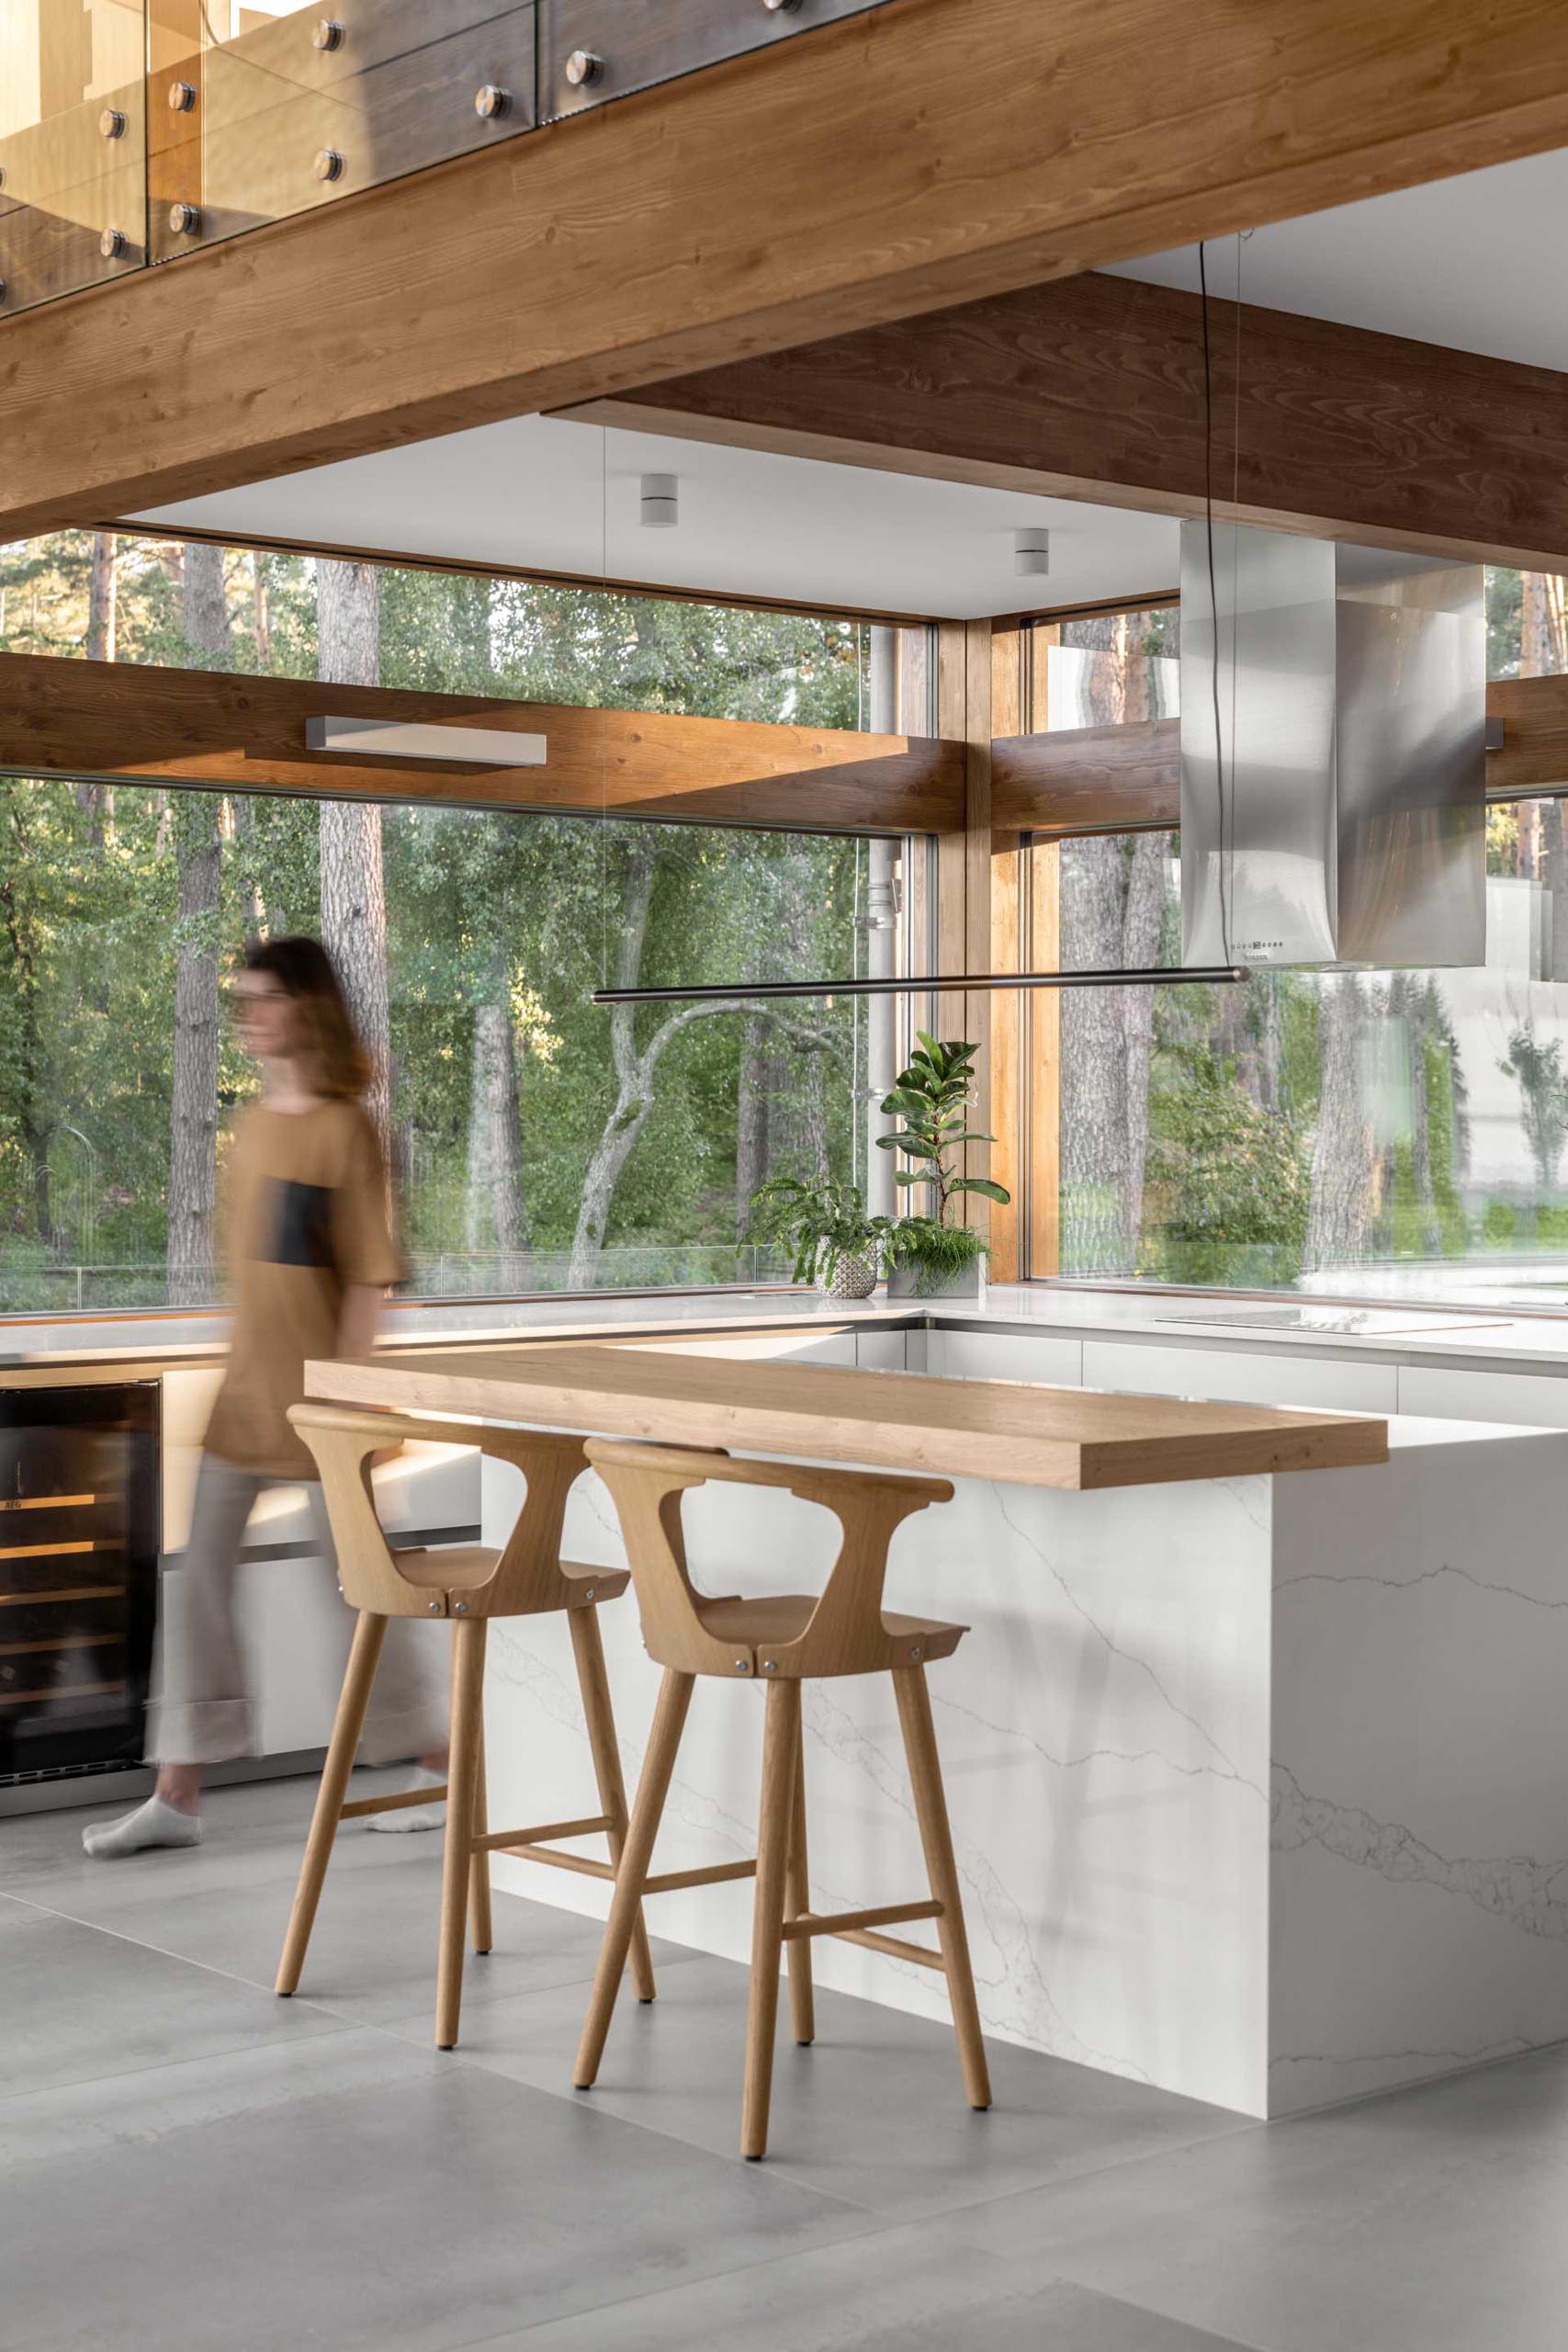 A modern kitchen with an island that includes a wood bar.